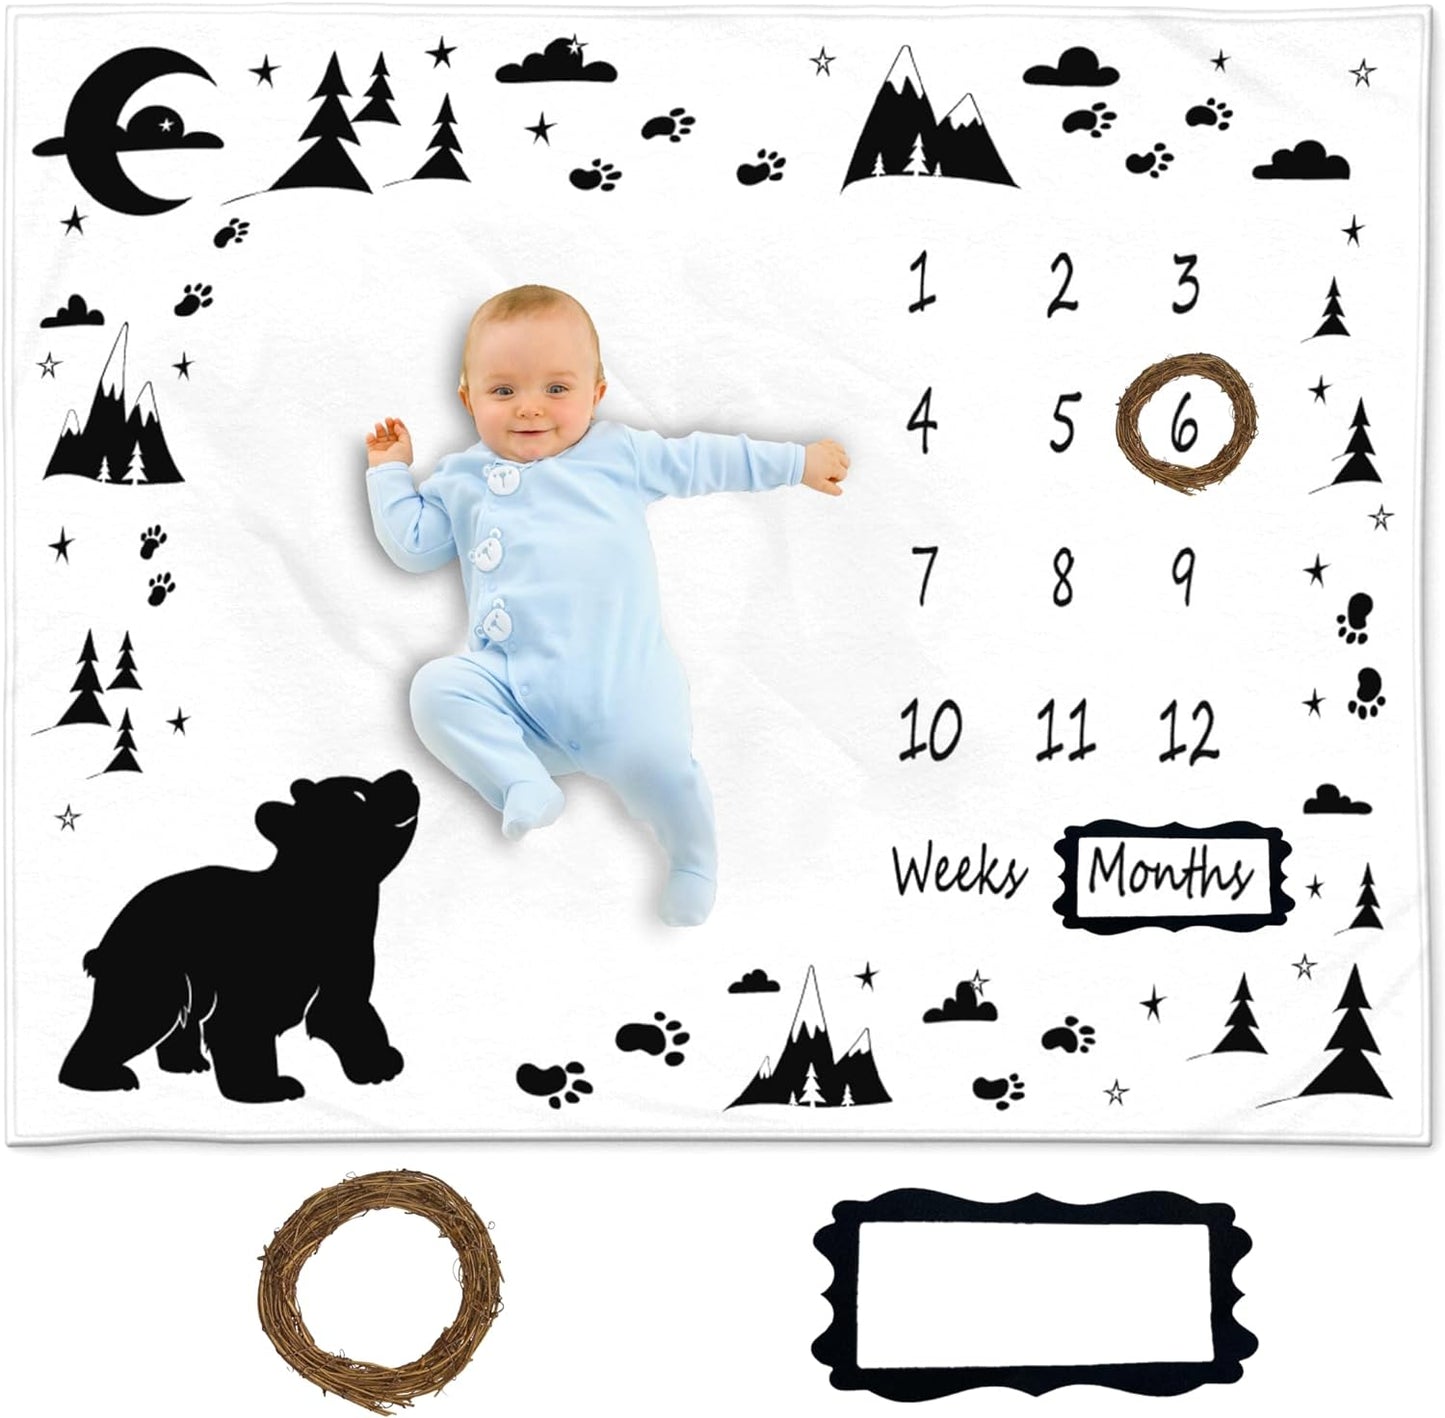 KEMINA BLANKETS Baby Monthly Milestone Blanket Boy - Milestone Blanket for Baby Boy Includes Felt Frame and Personalized Board, Adventure Mountain Month Blanket Woodland Nursery, Baby Shower 50x40